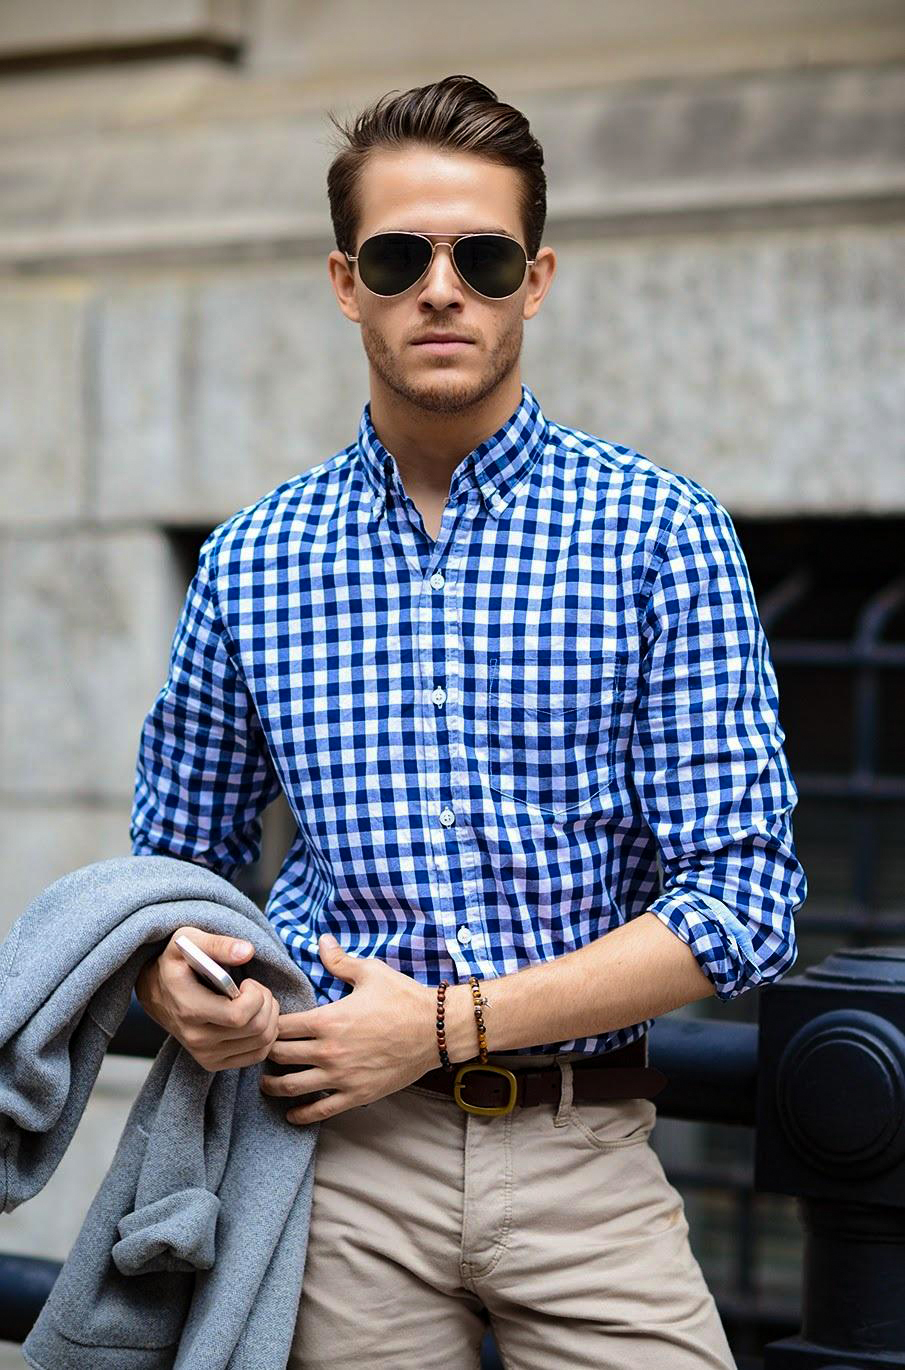 12 Best Plaid Pants Combination For Men To Have Smart Look